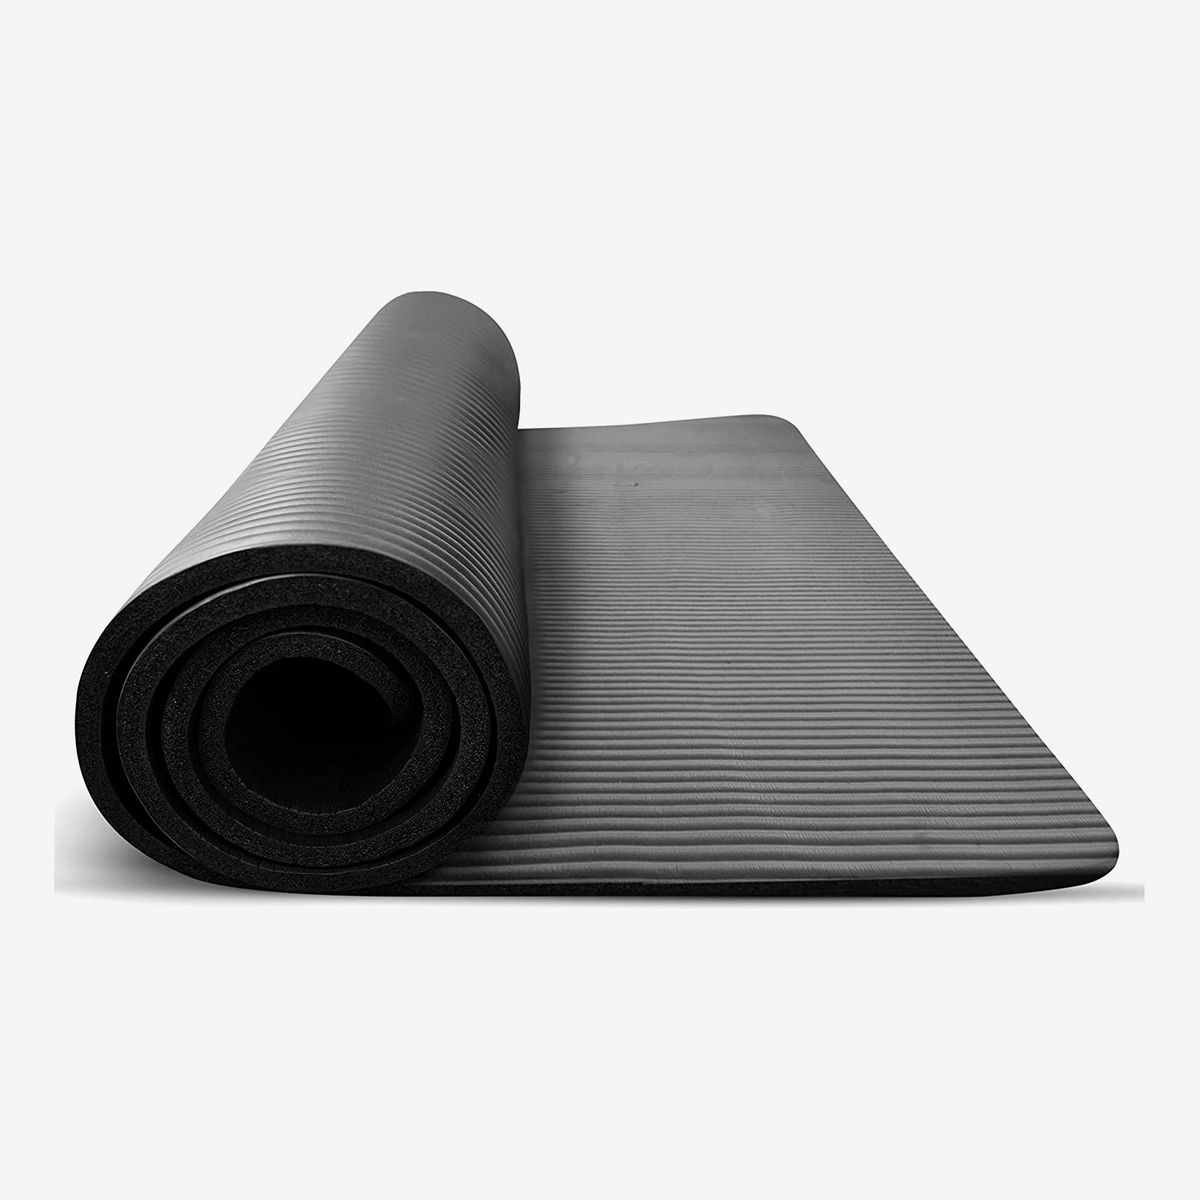 Anti-Skid/Shock-AbsorbingA Sound Insulation Pad Acoustic Carpet Padding Black Soundproof Carpet for Piano 160x80cm Piano Square Rug for Studio Sound Blankets Noise Blocking